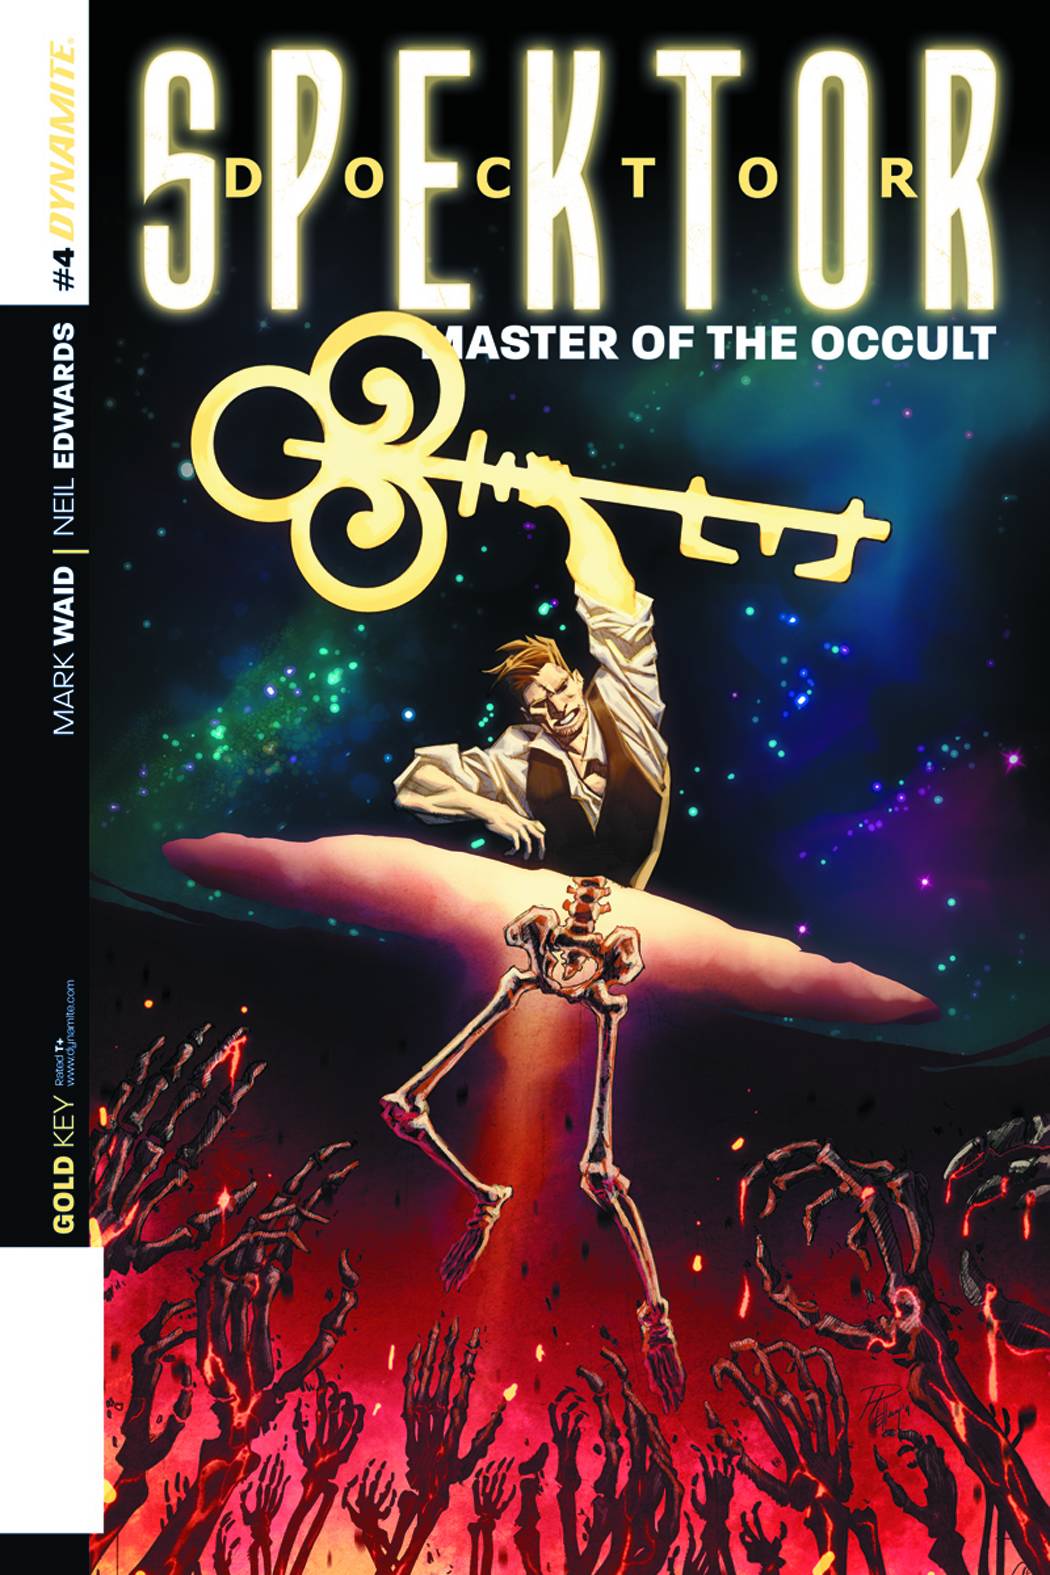 DOCTOR SPEKTOR: MASTER OF THE OCCULT #4